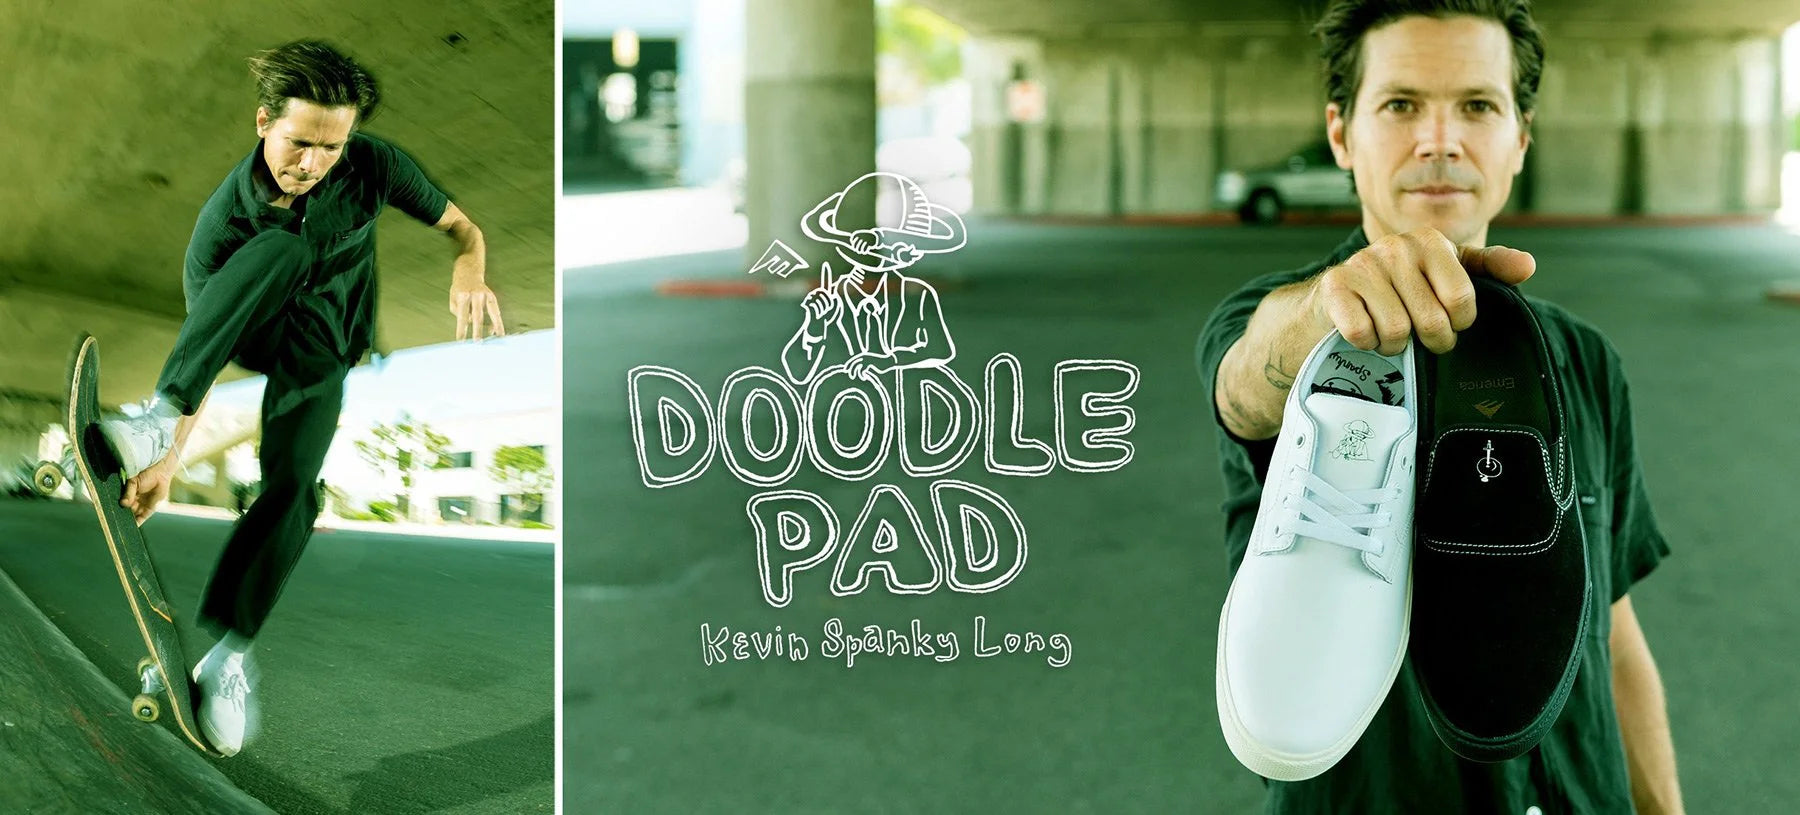 Emerica & Kevin Spanky Long Proudly Present The Doodle Pad Collection